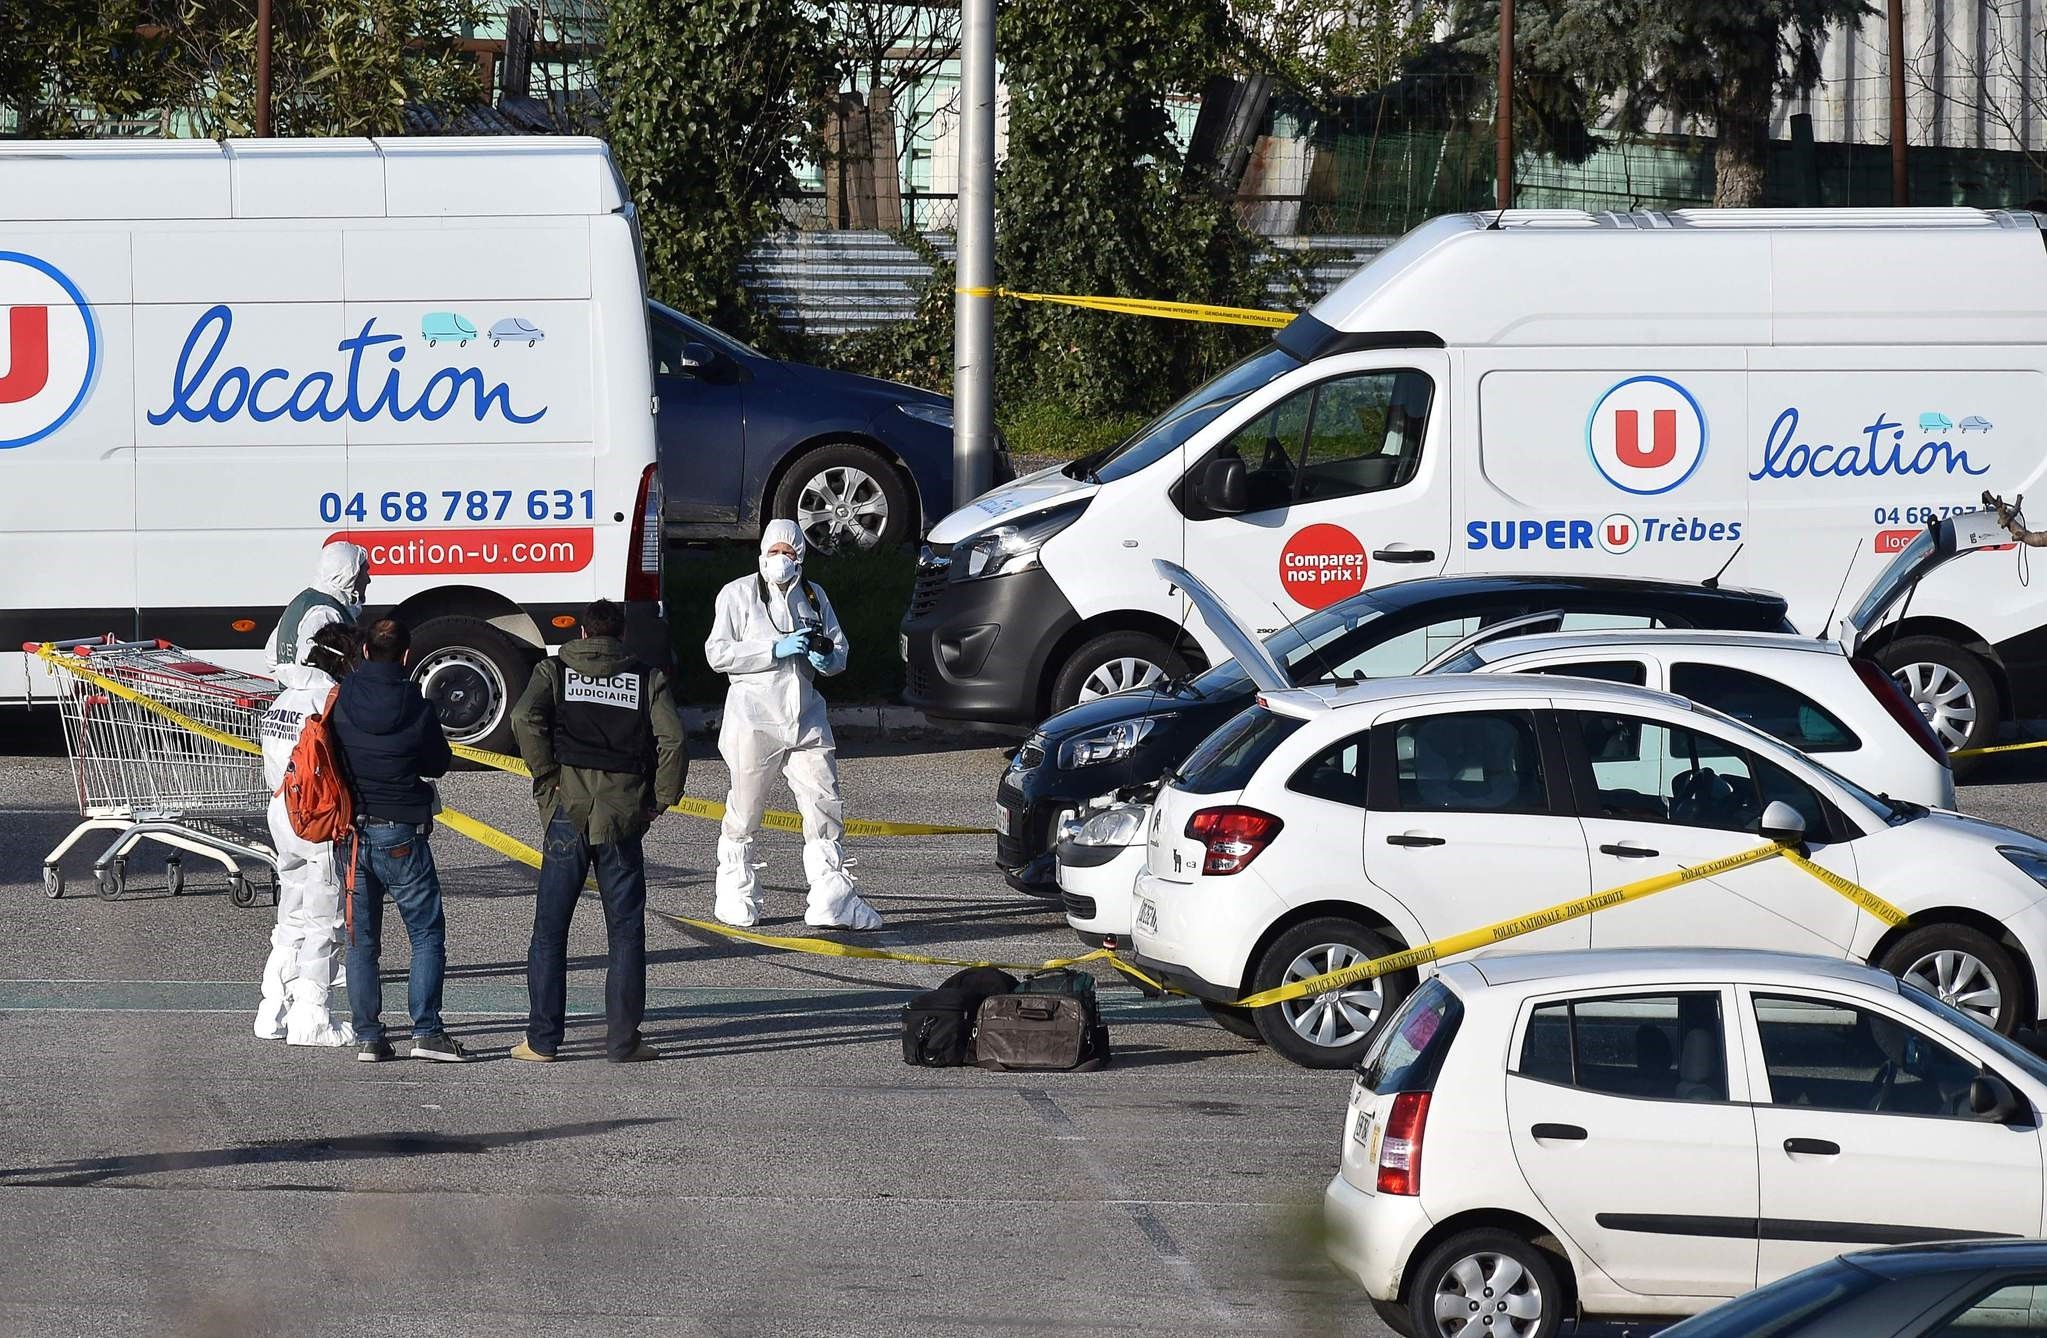 French forensic officers arrive to inspect a vehicle (C hood up) believed to belong to the hostage taker and parked outside the Super U supermarket in the town of Trebes, southern France on March 23, 2018. (AFP Photo)